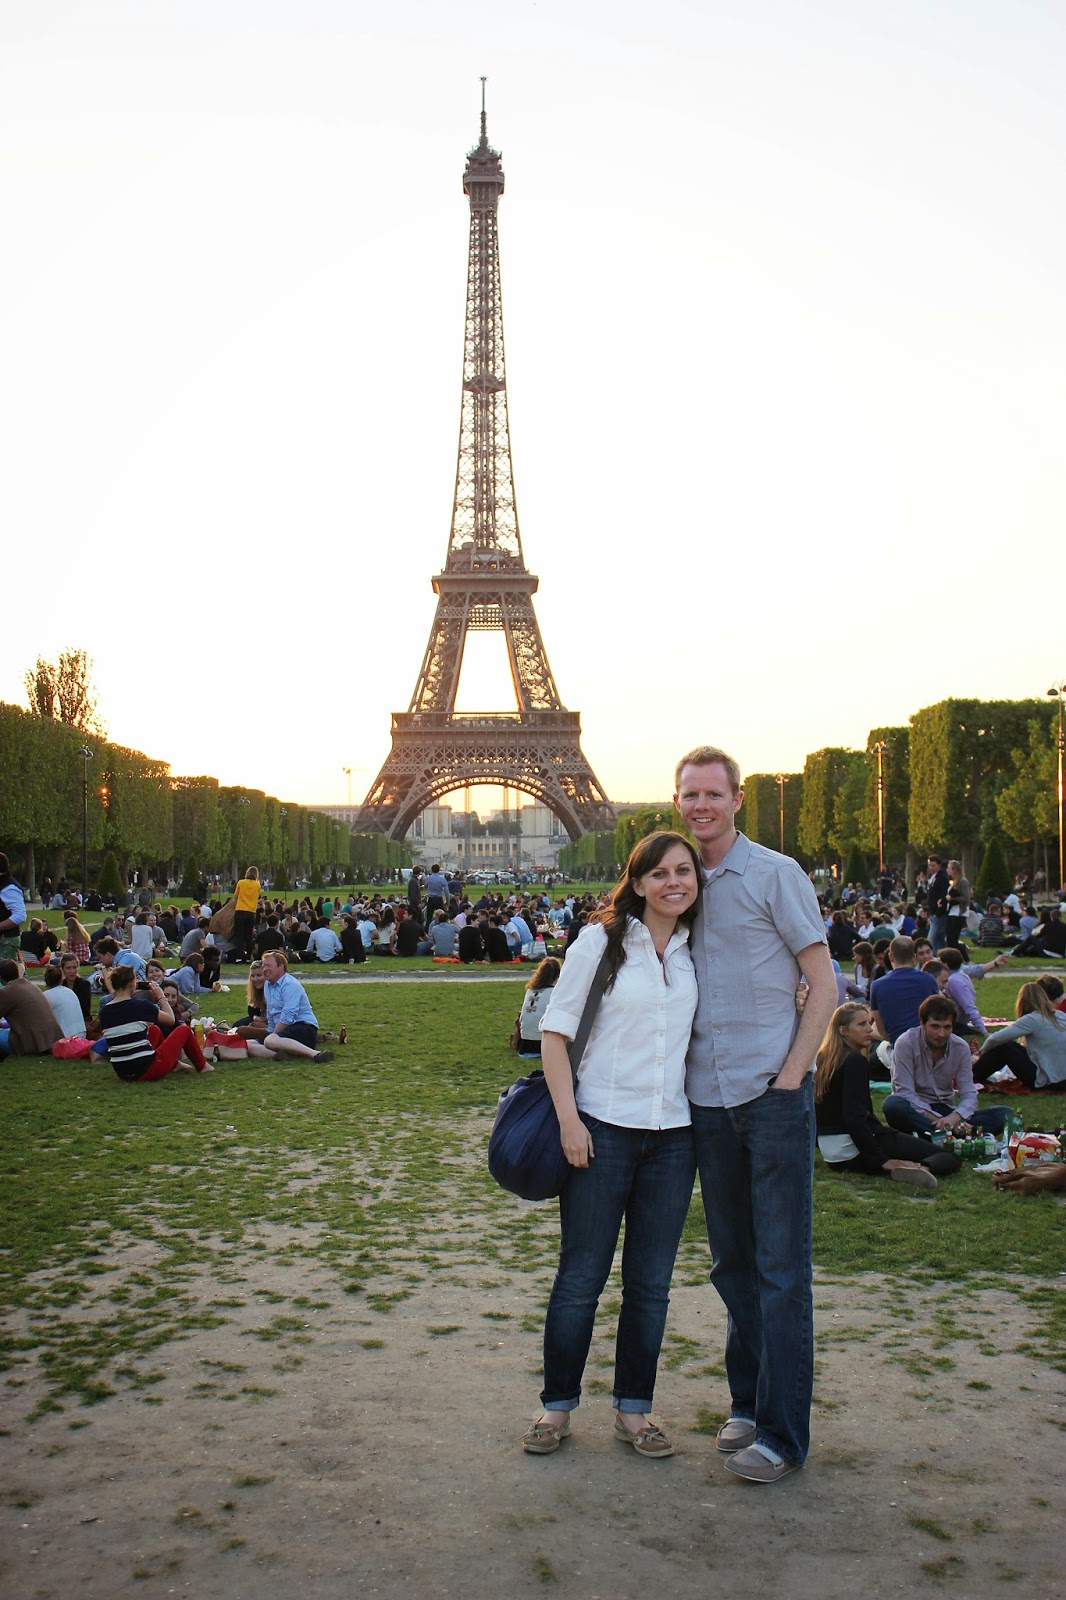 Paris Day 1: Eiffel Tower Picnic: The Most Romantic Night of Our Lives